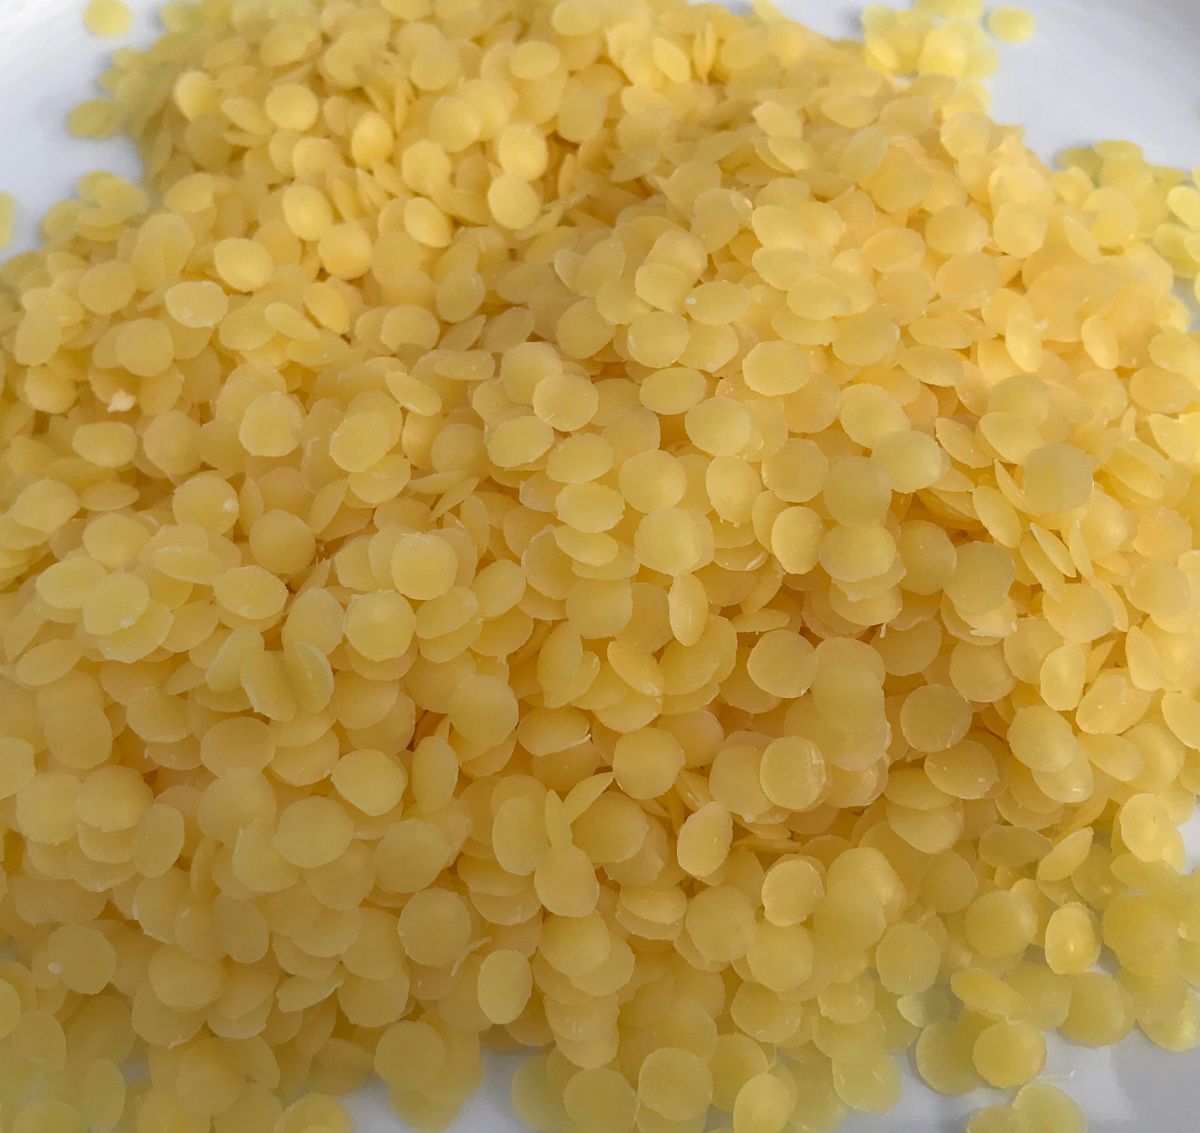 White Filtered Beeswax - 1 lb. Pellets For Sale Free Shipping 3 Or More